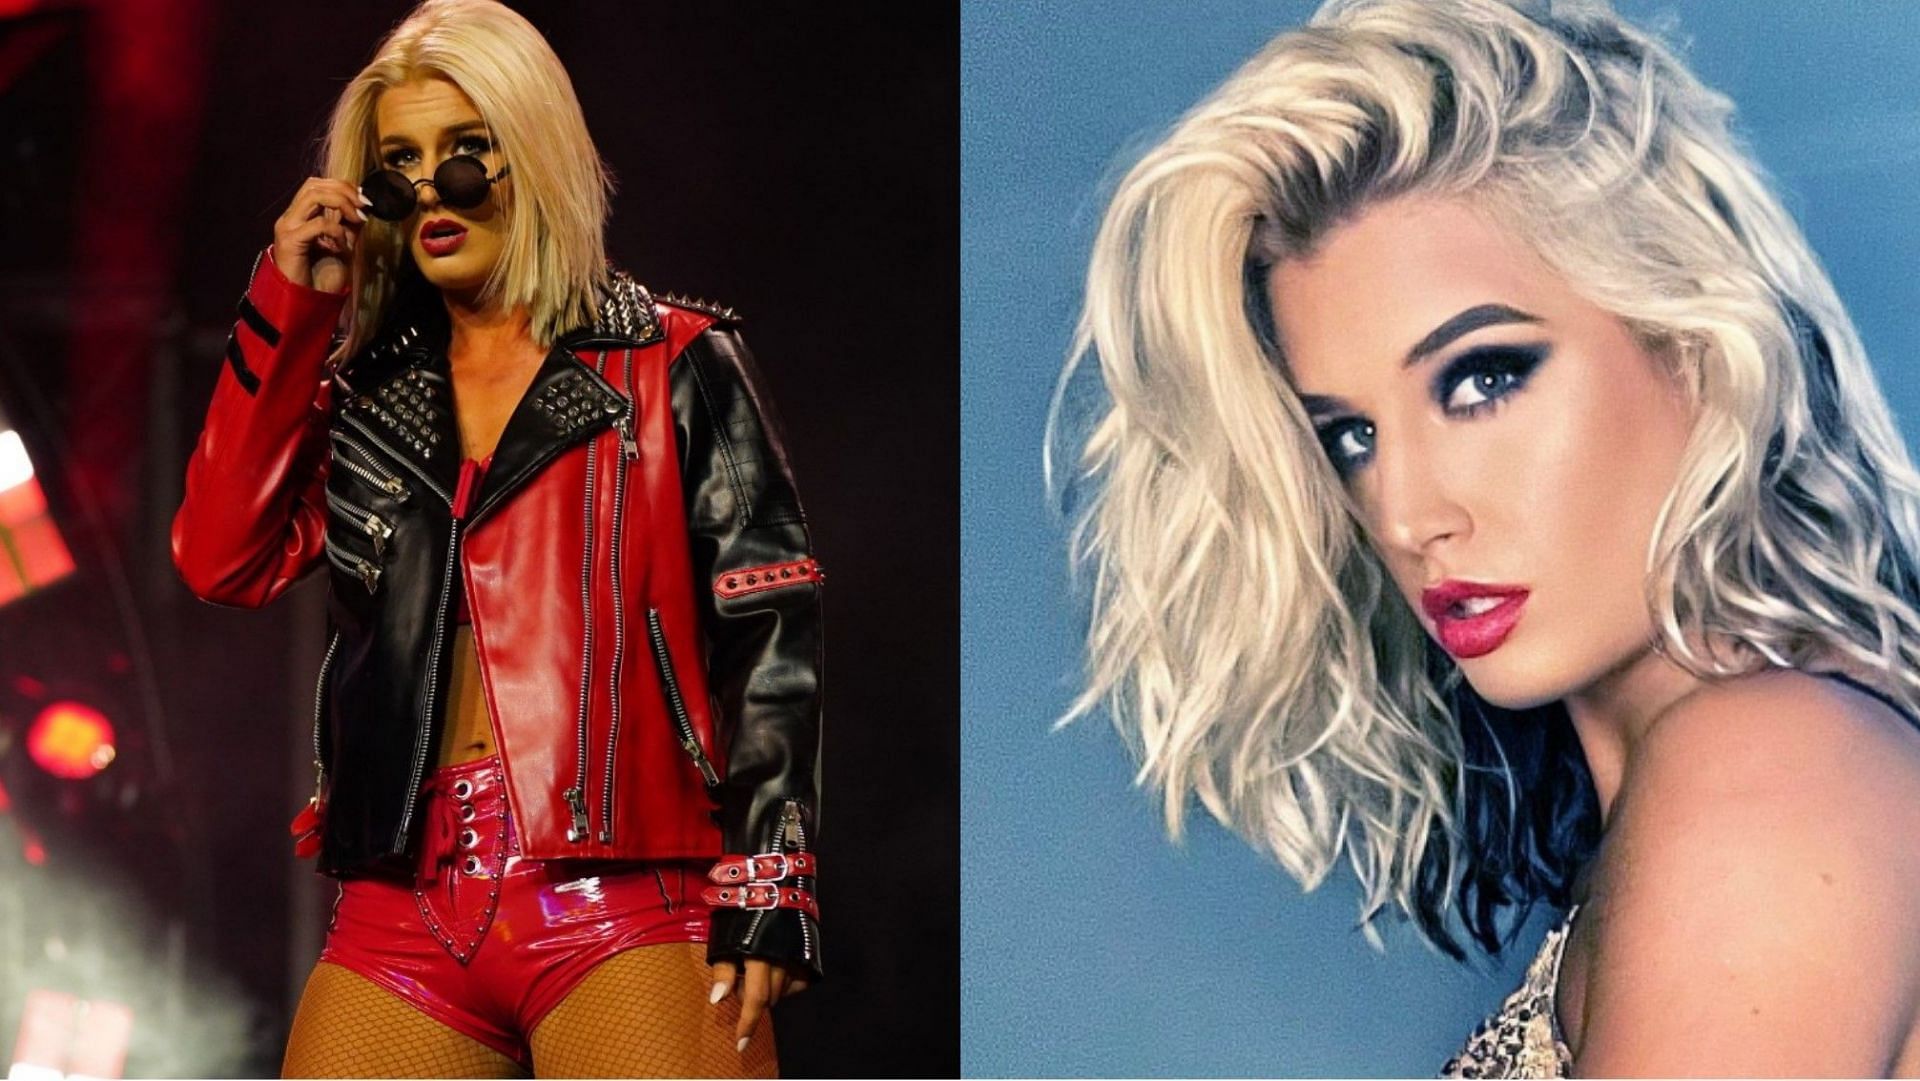 Toni Storm has thrived since leaving WWE!